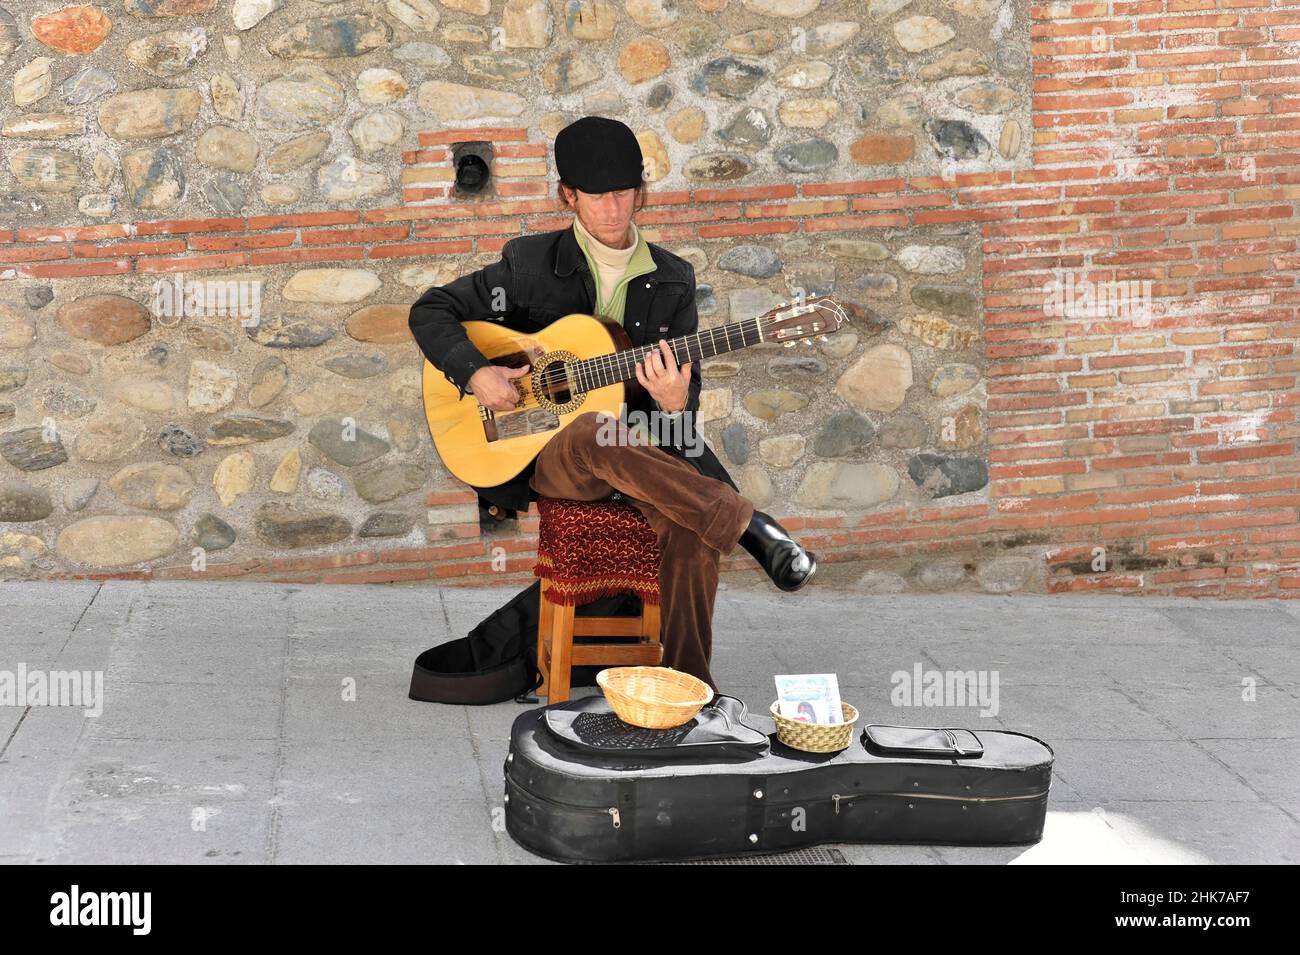 Busker, Andalusia, Spain Stock Photo